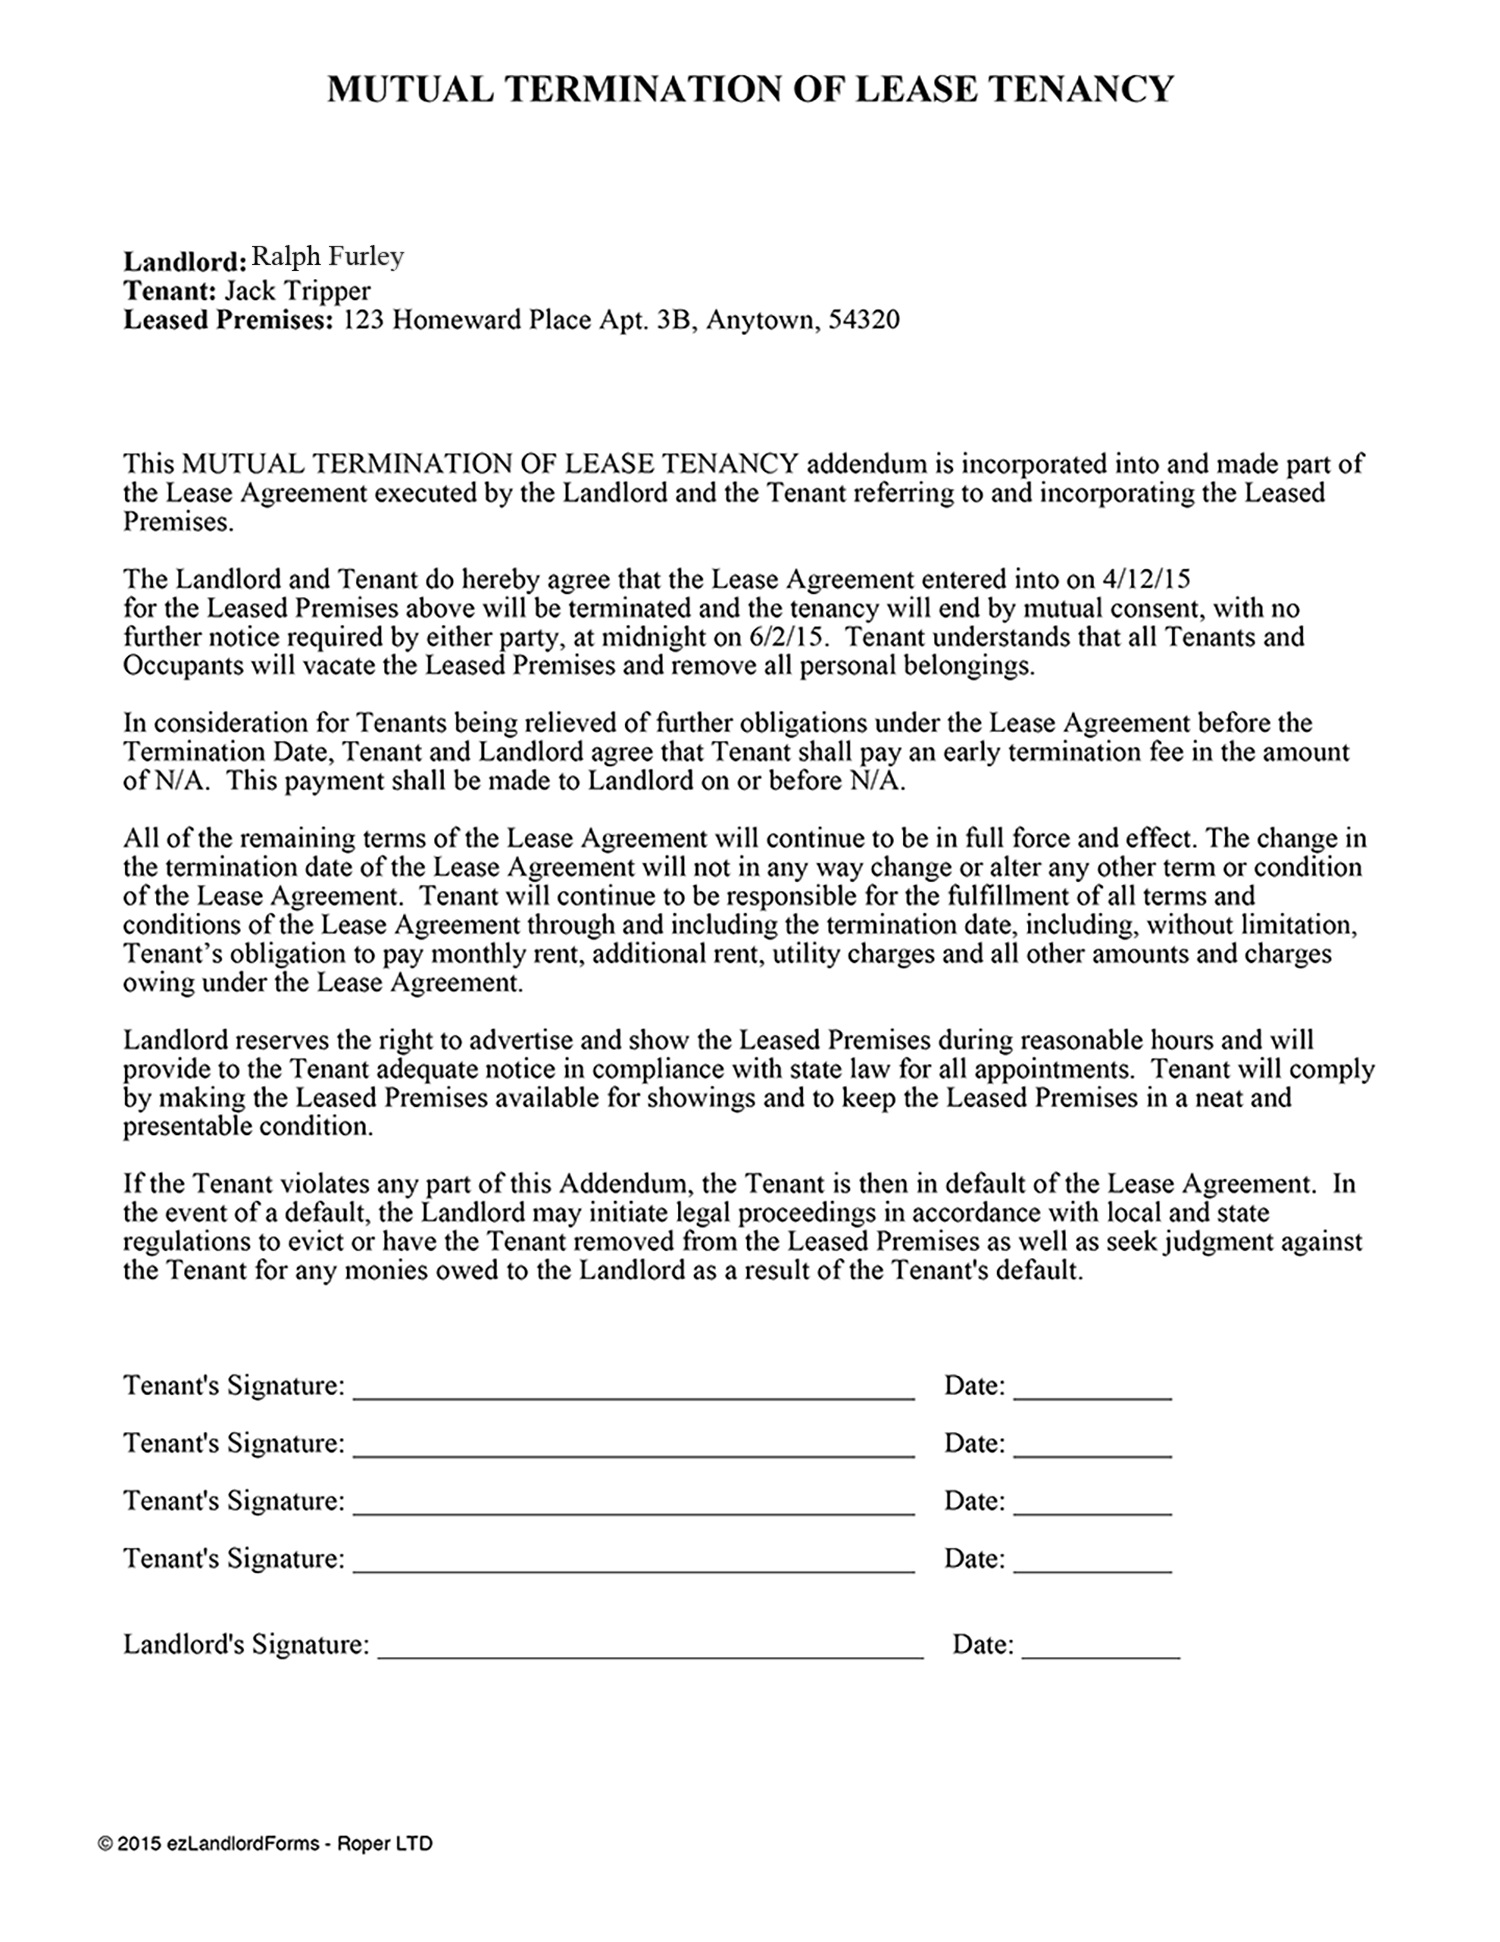 Letter To Landlord To Terminate Lease from www.ezlandlordforms.com